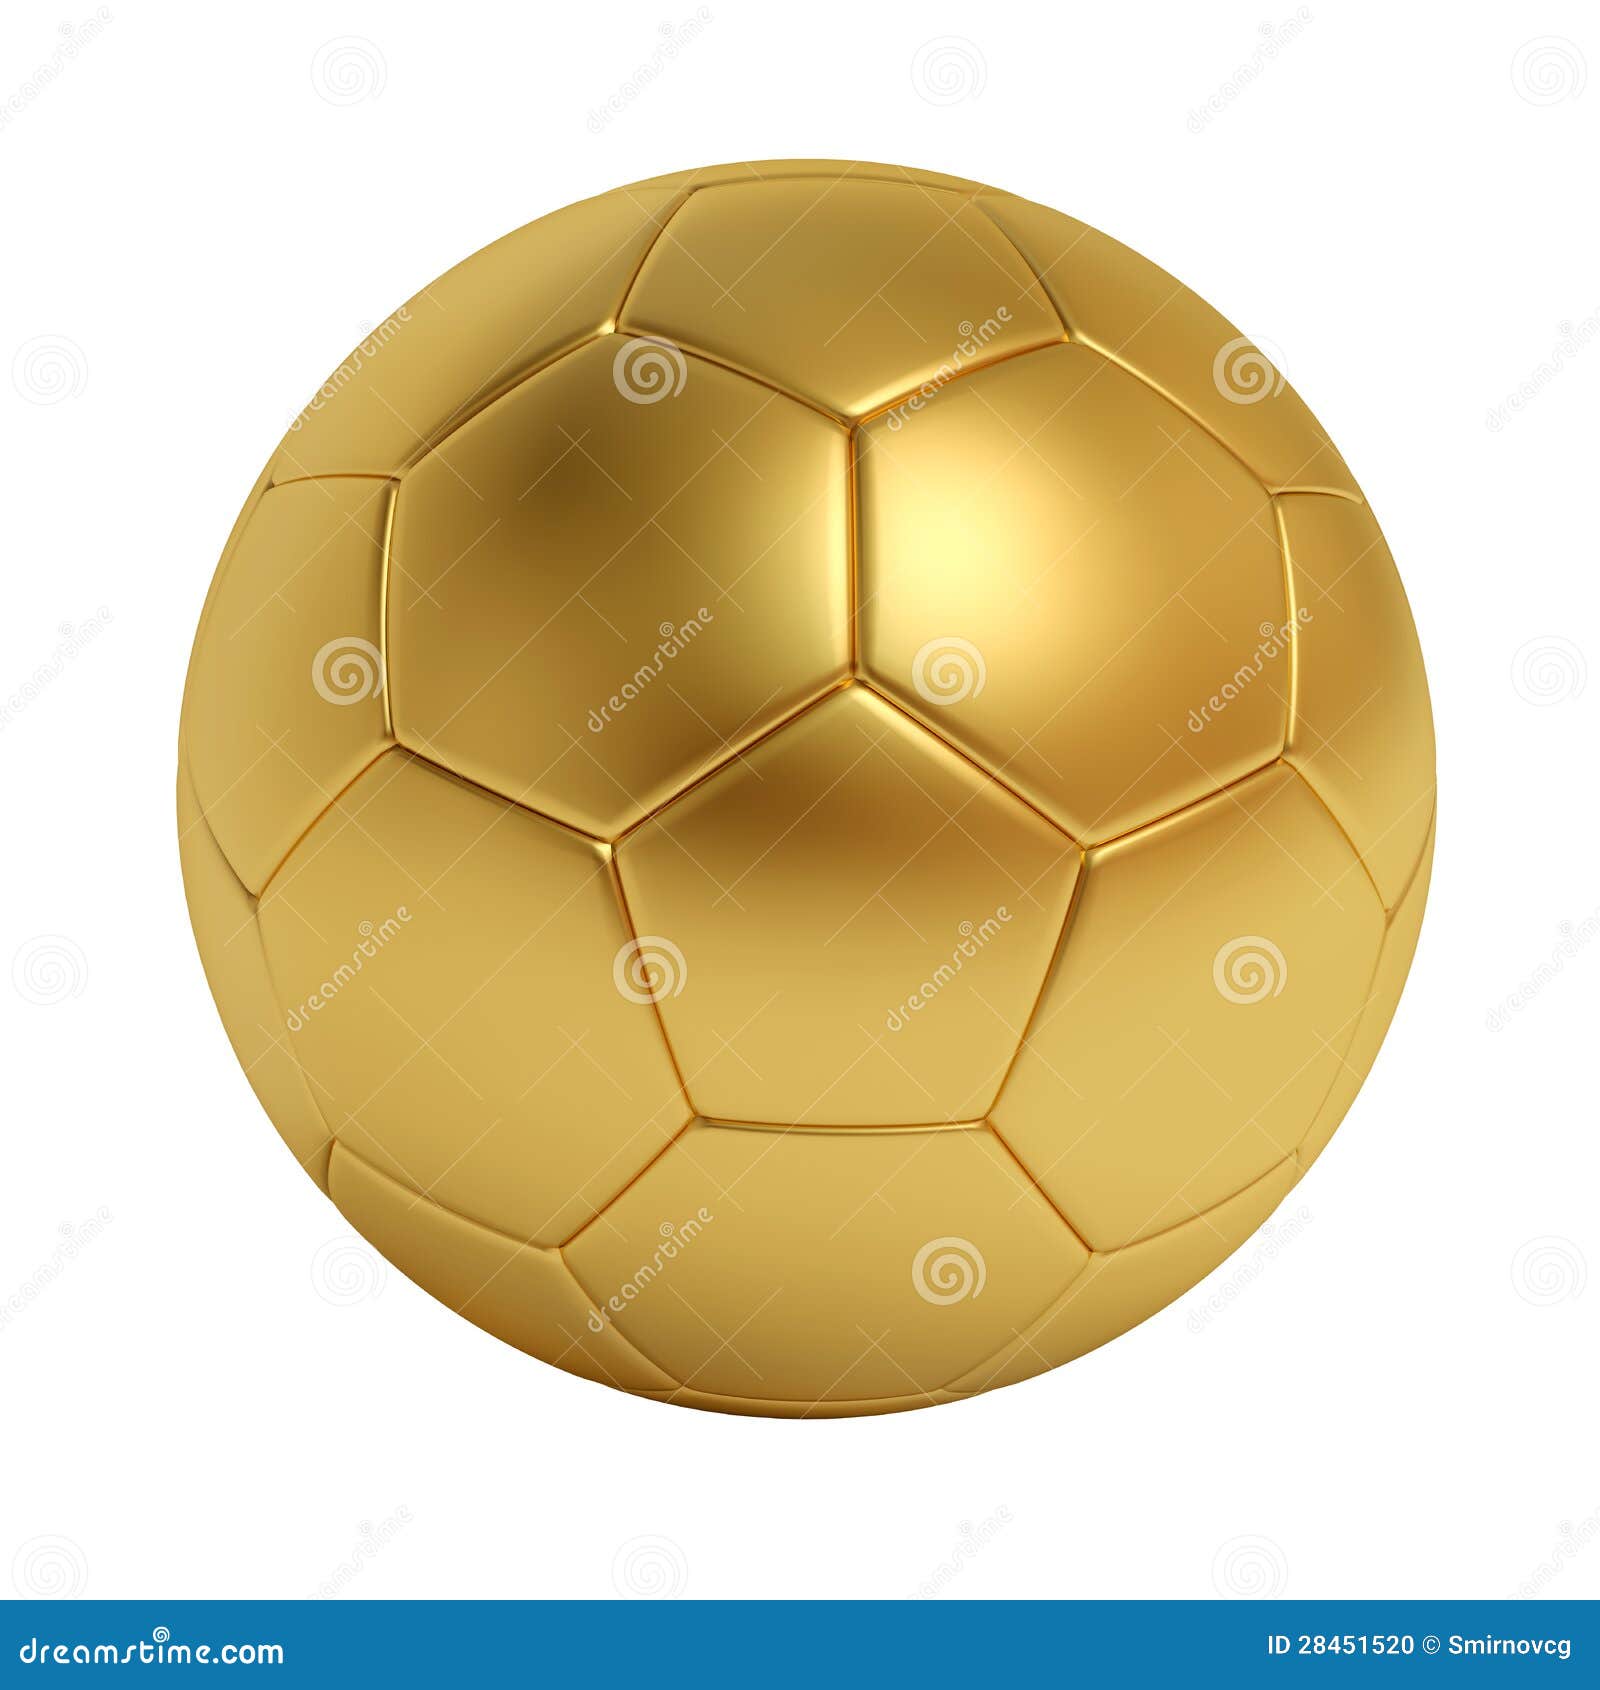 Golden Soccer Ball Isolated On White Background Stock Photo - Image ...